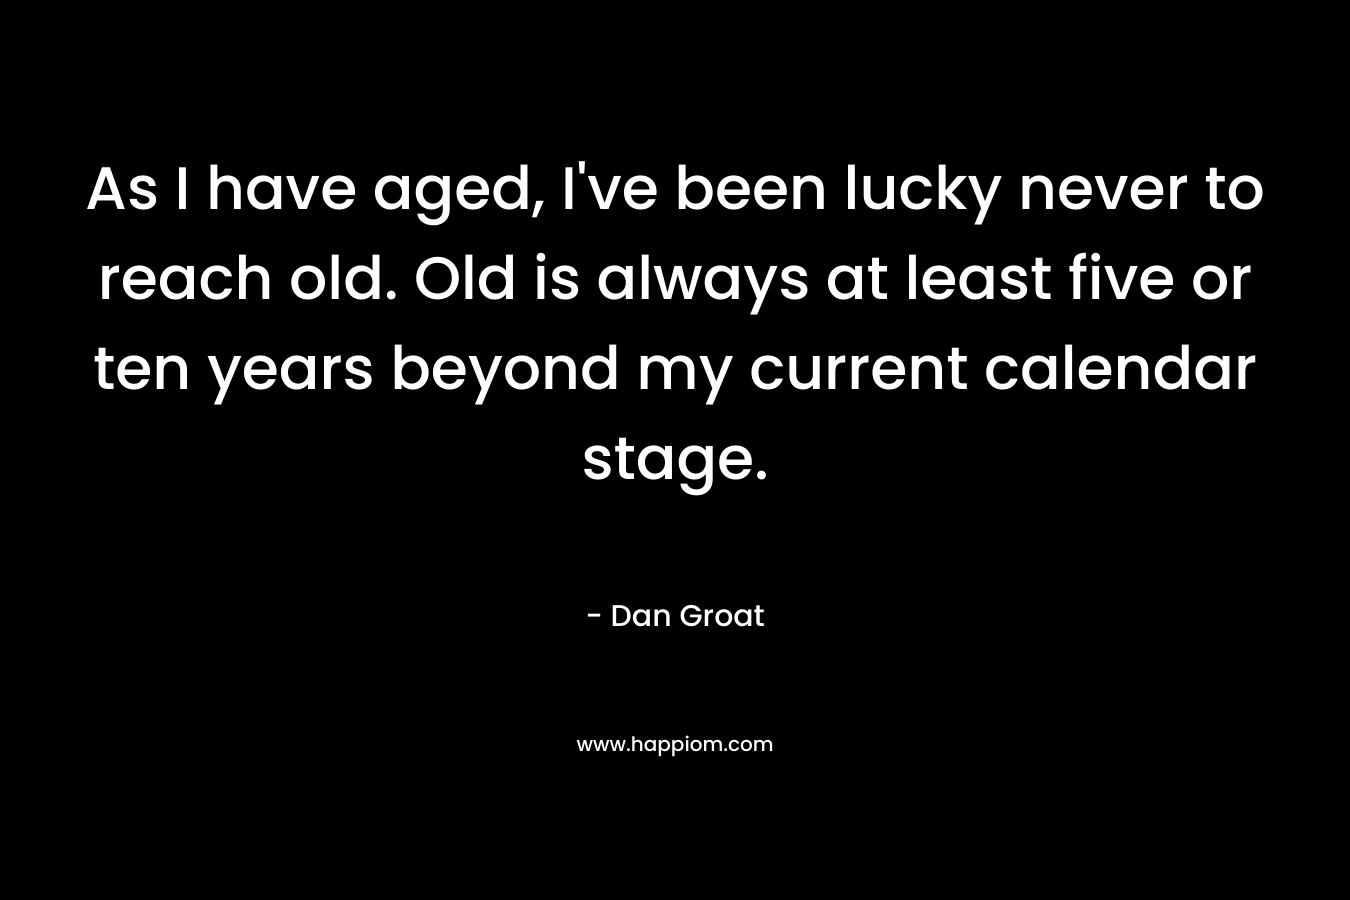 As I have aged, I’ve been lucky never to reach old. Old is always at least five or ten years beyond my current calendar stage. – Dan Groat